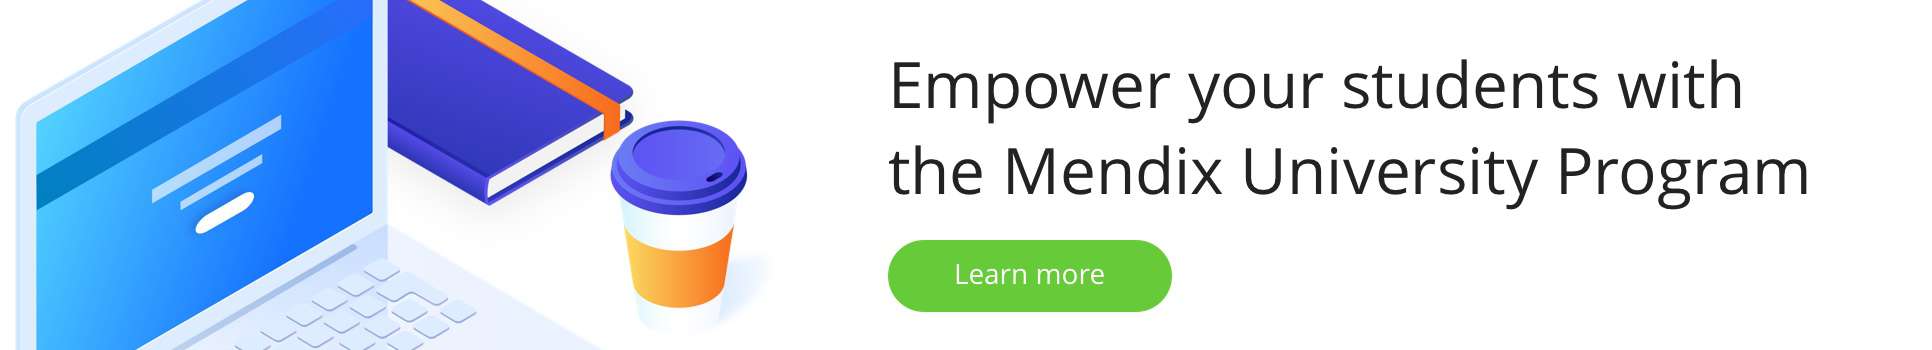 Empower your students with the Mendix University Program